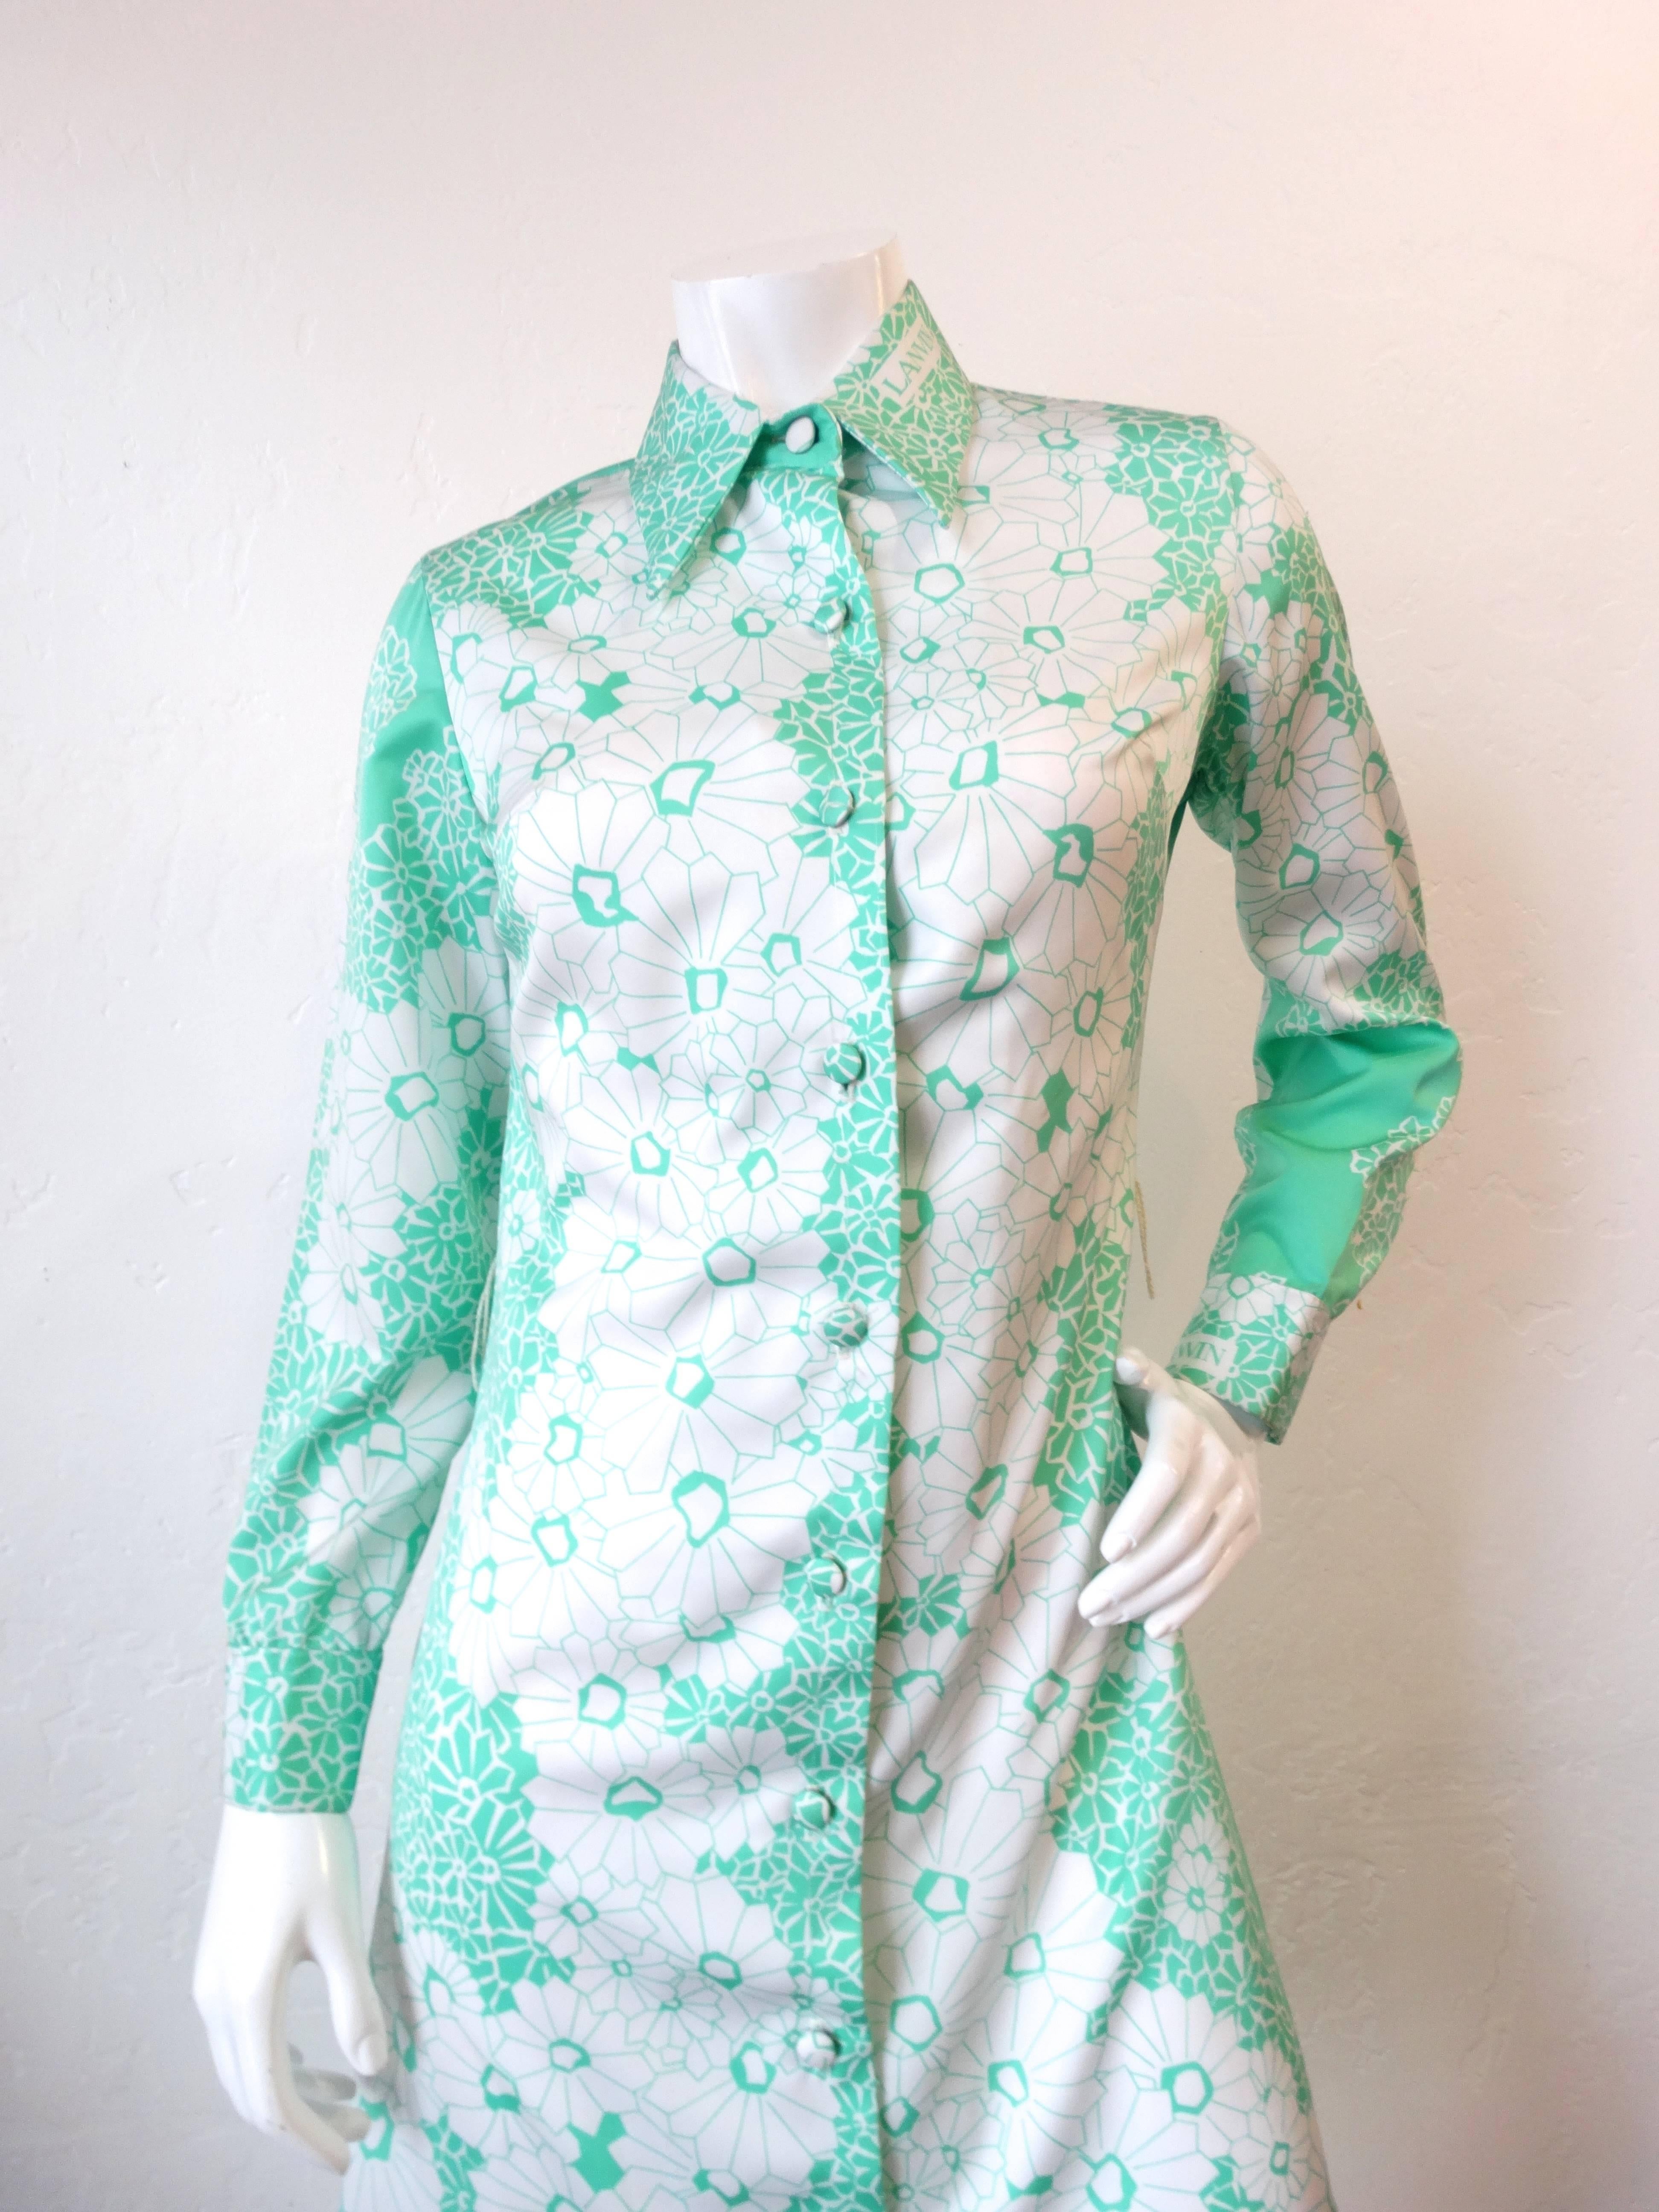 The most darling 1960s dress from iconic designer Lanvin! Covered in a flattering all over floral print in a gorgeous shade of mint and white! Matching cloth covered buttons up the front. Our favorite part of this piece? 